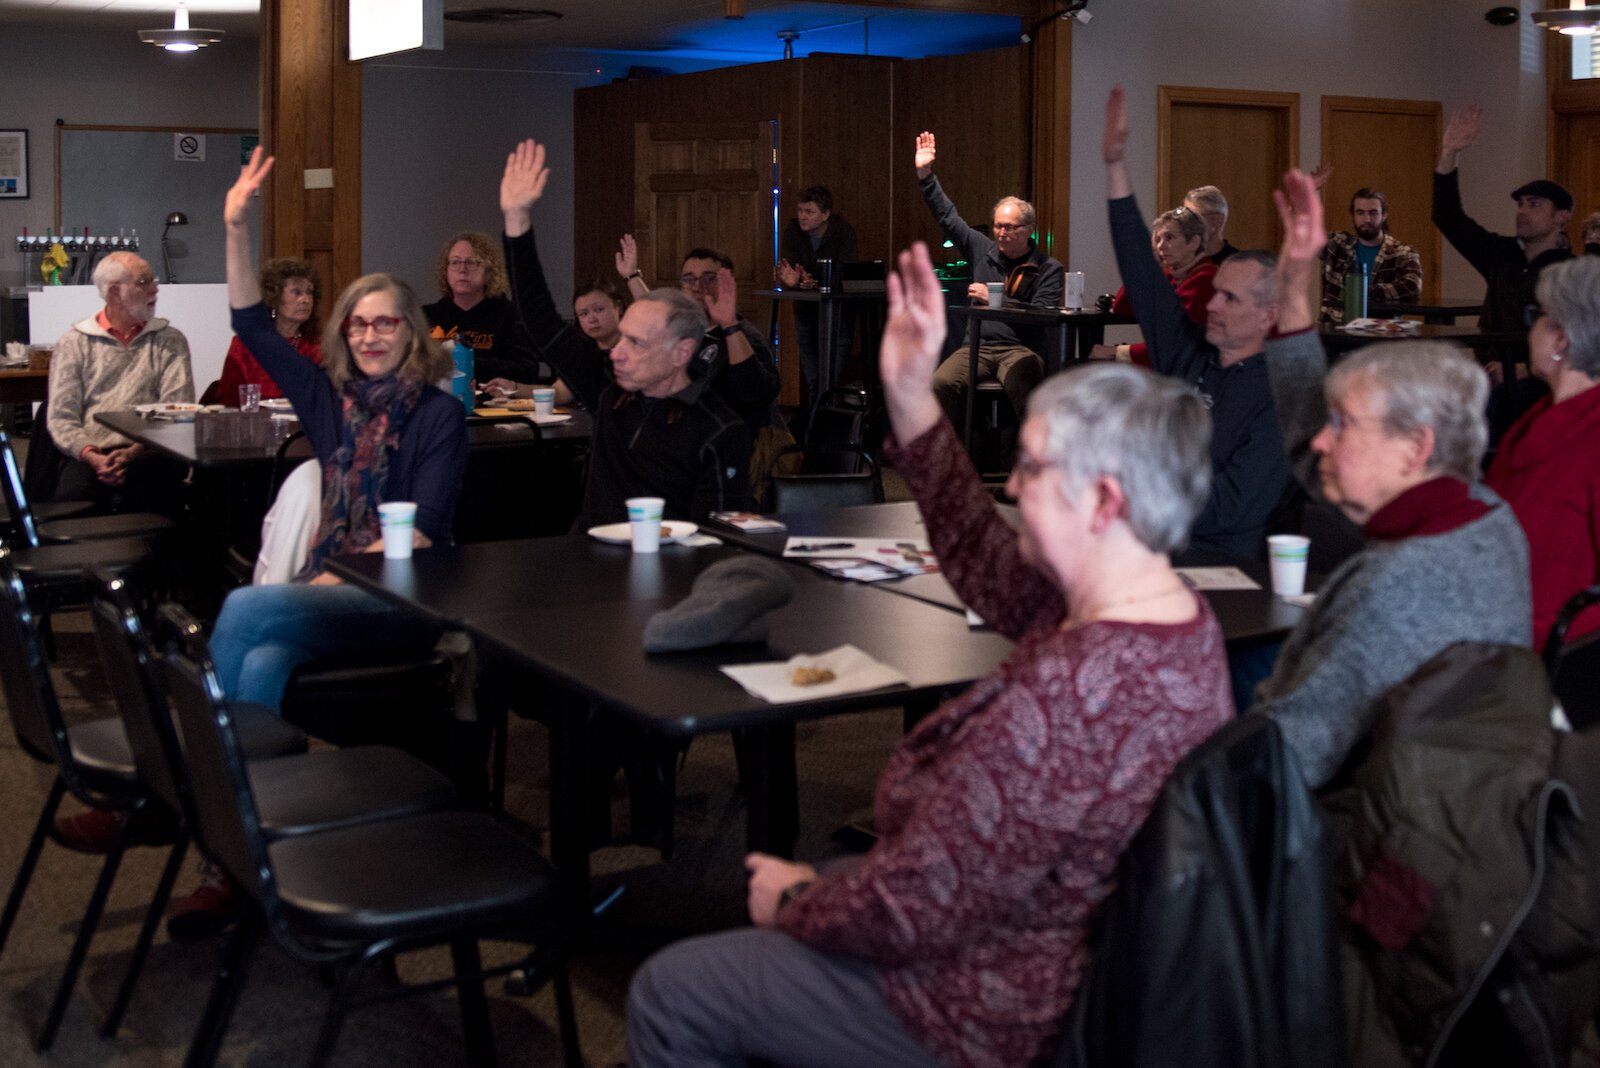 The Kalamazoo Lyceum offers attendees opportunities to hear diverse viewpoints.